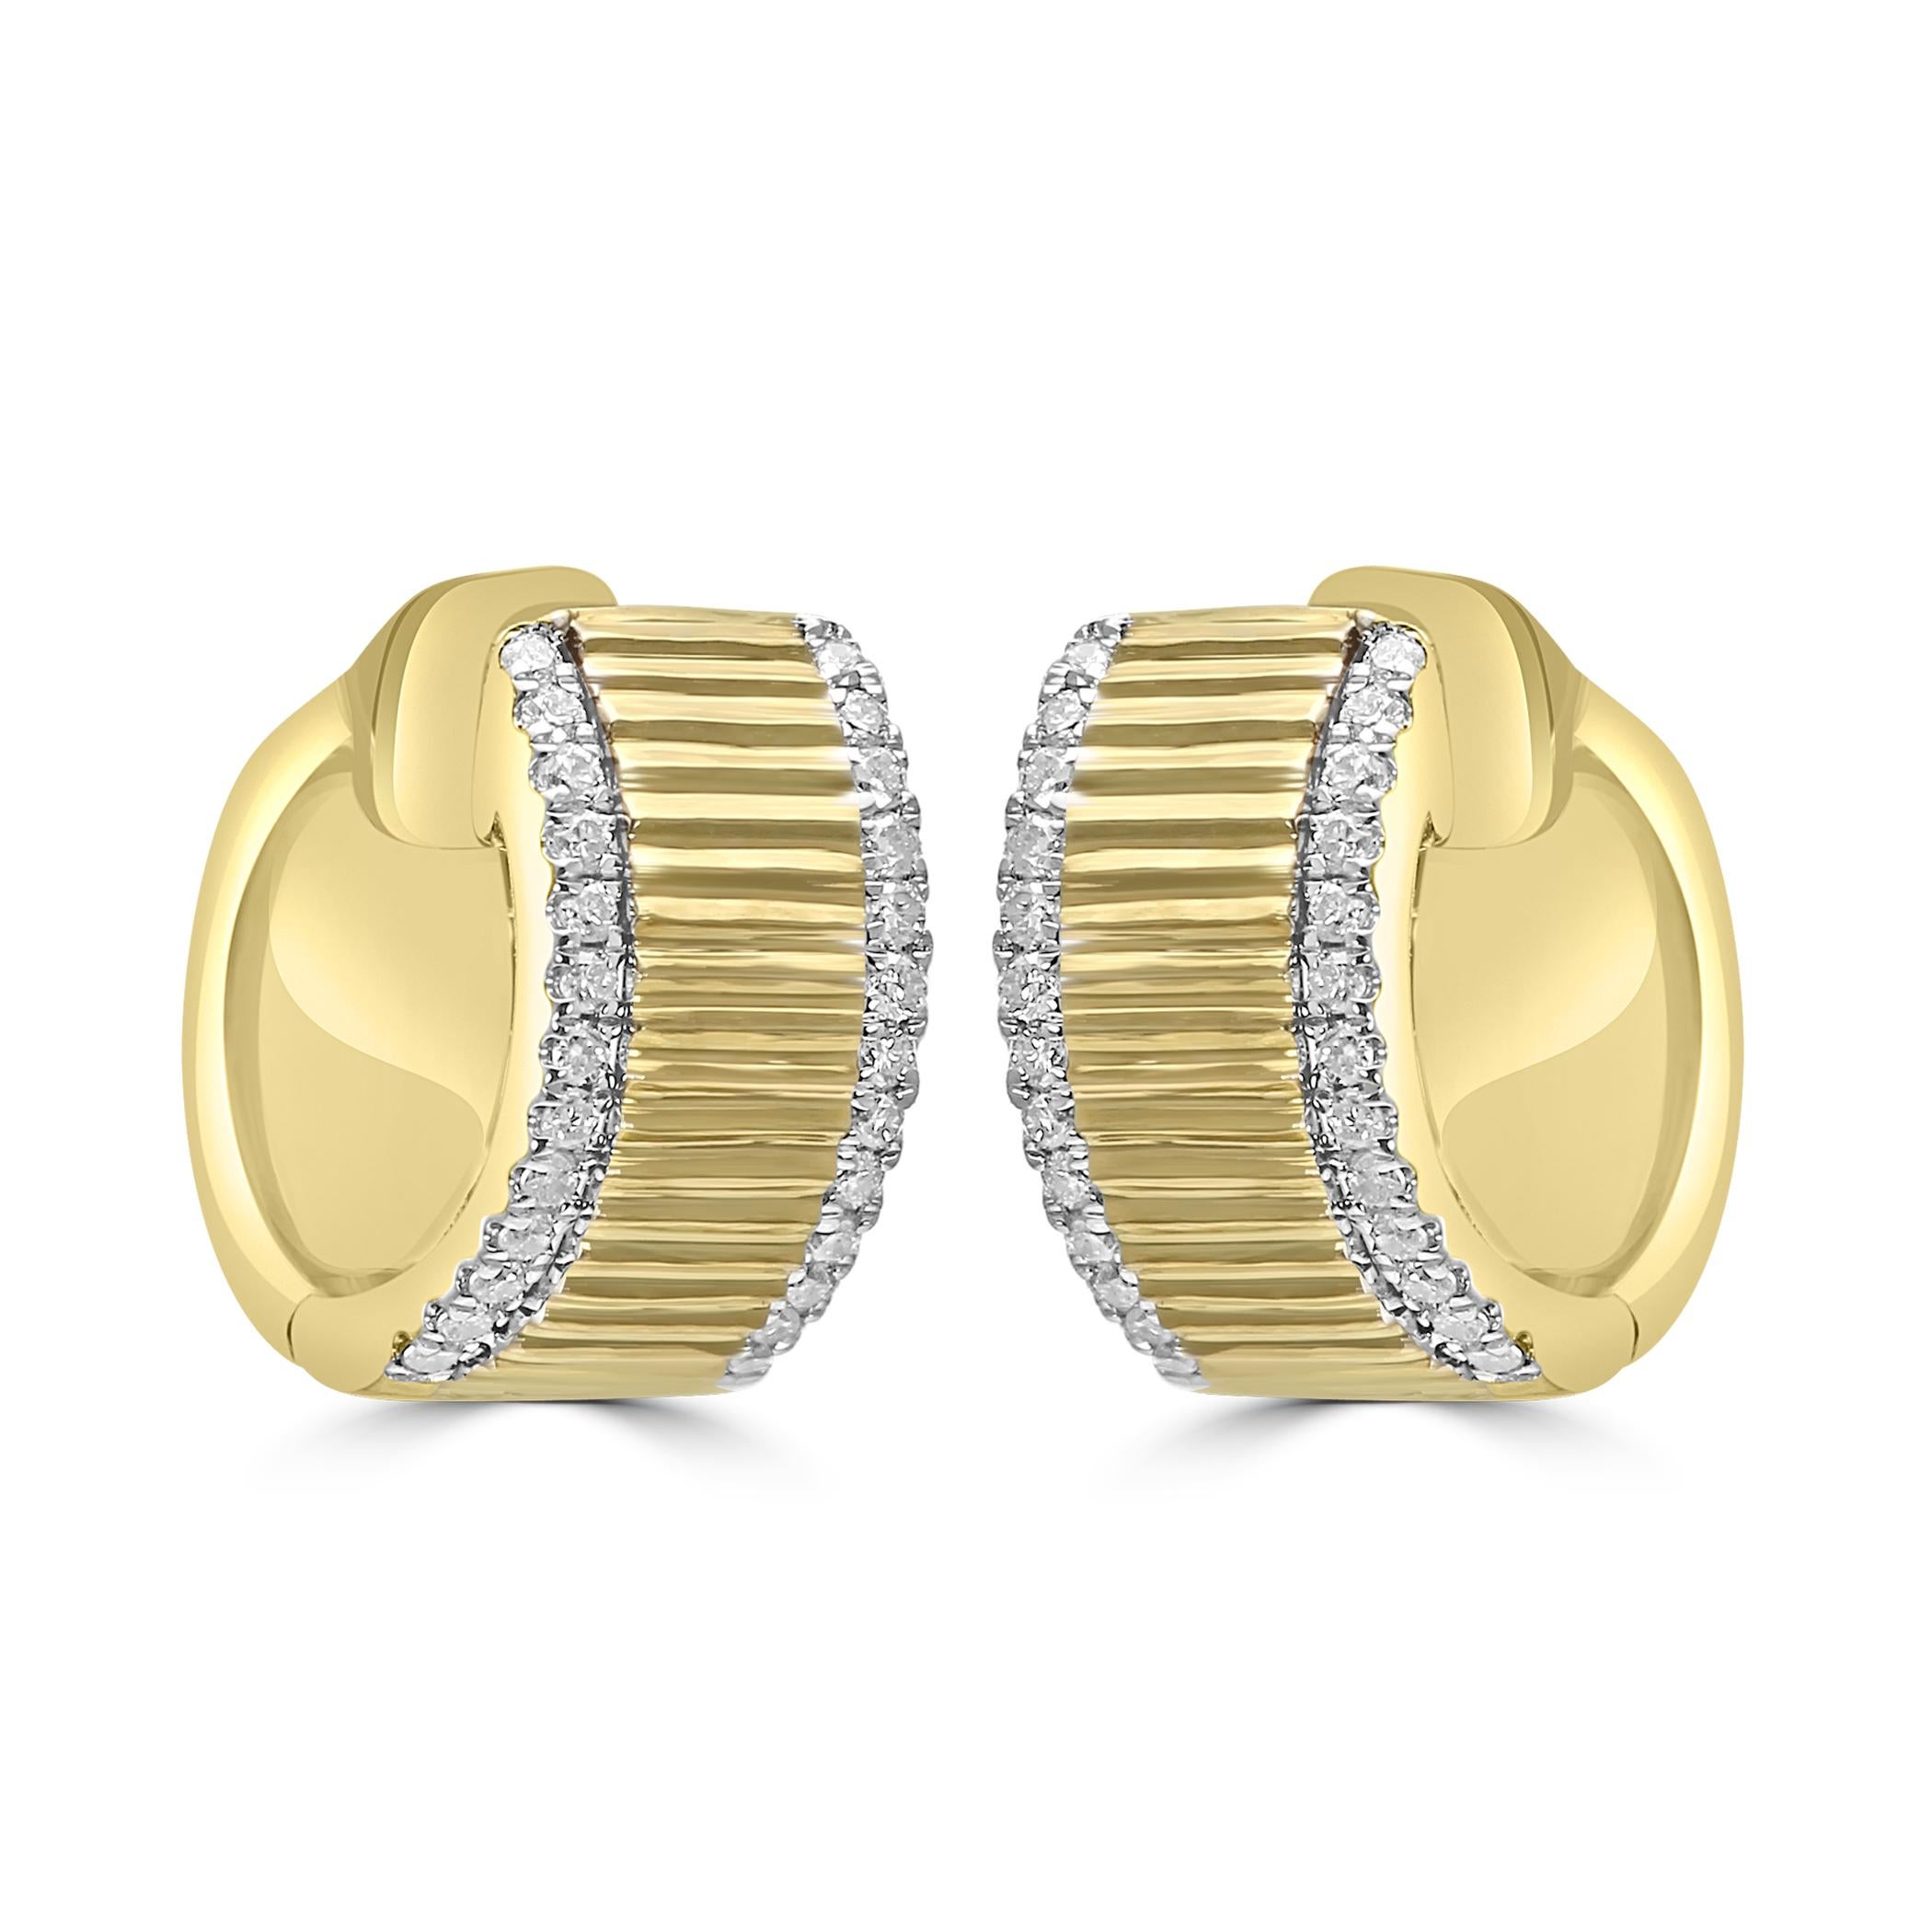 Enhance your style with our gorgeous 14K Yellow Gold Fashion Huggie Dangle Earrings, adorned with 0.12 carats of dazzling White Diamond Rounds. These earrings offer a perfect blend of sophistication and modern flair, making them a versatile and